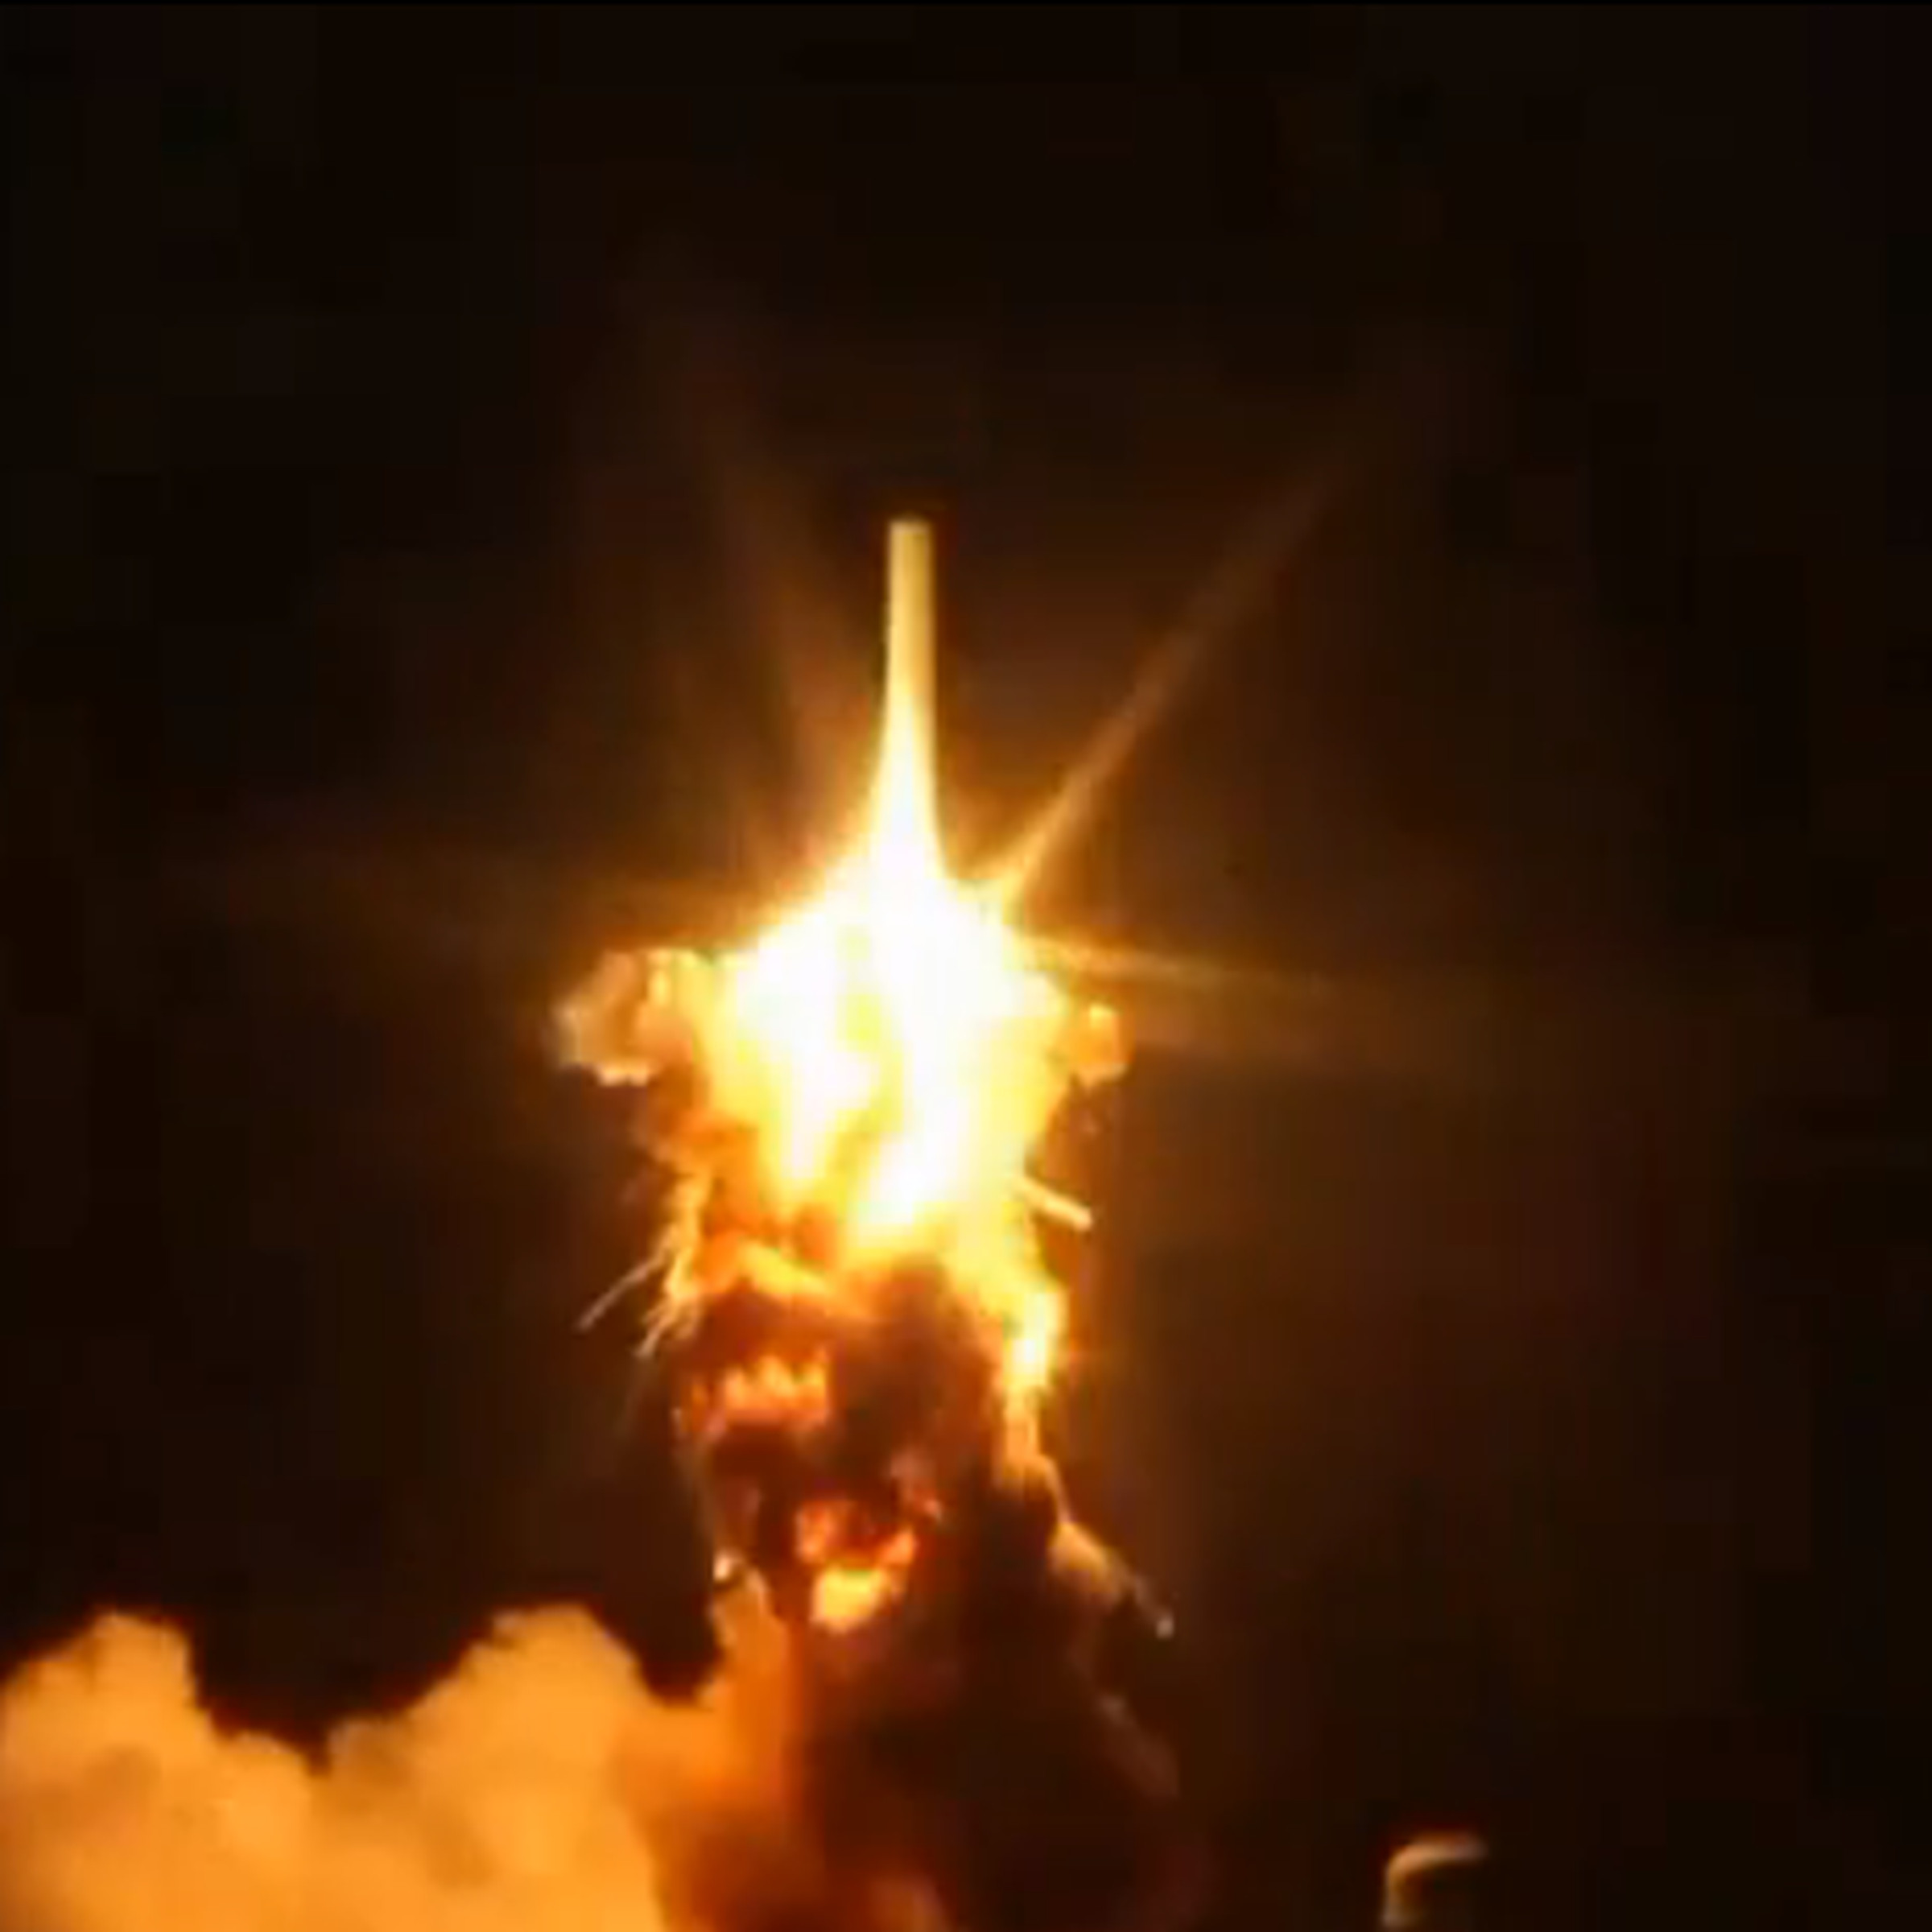 Screenshot from the live feed of Antares' failed launch.